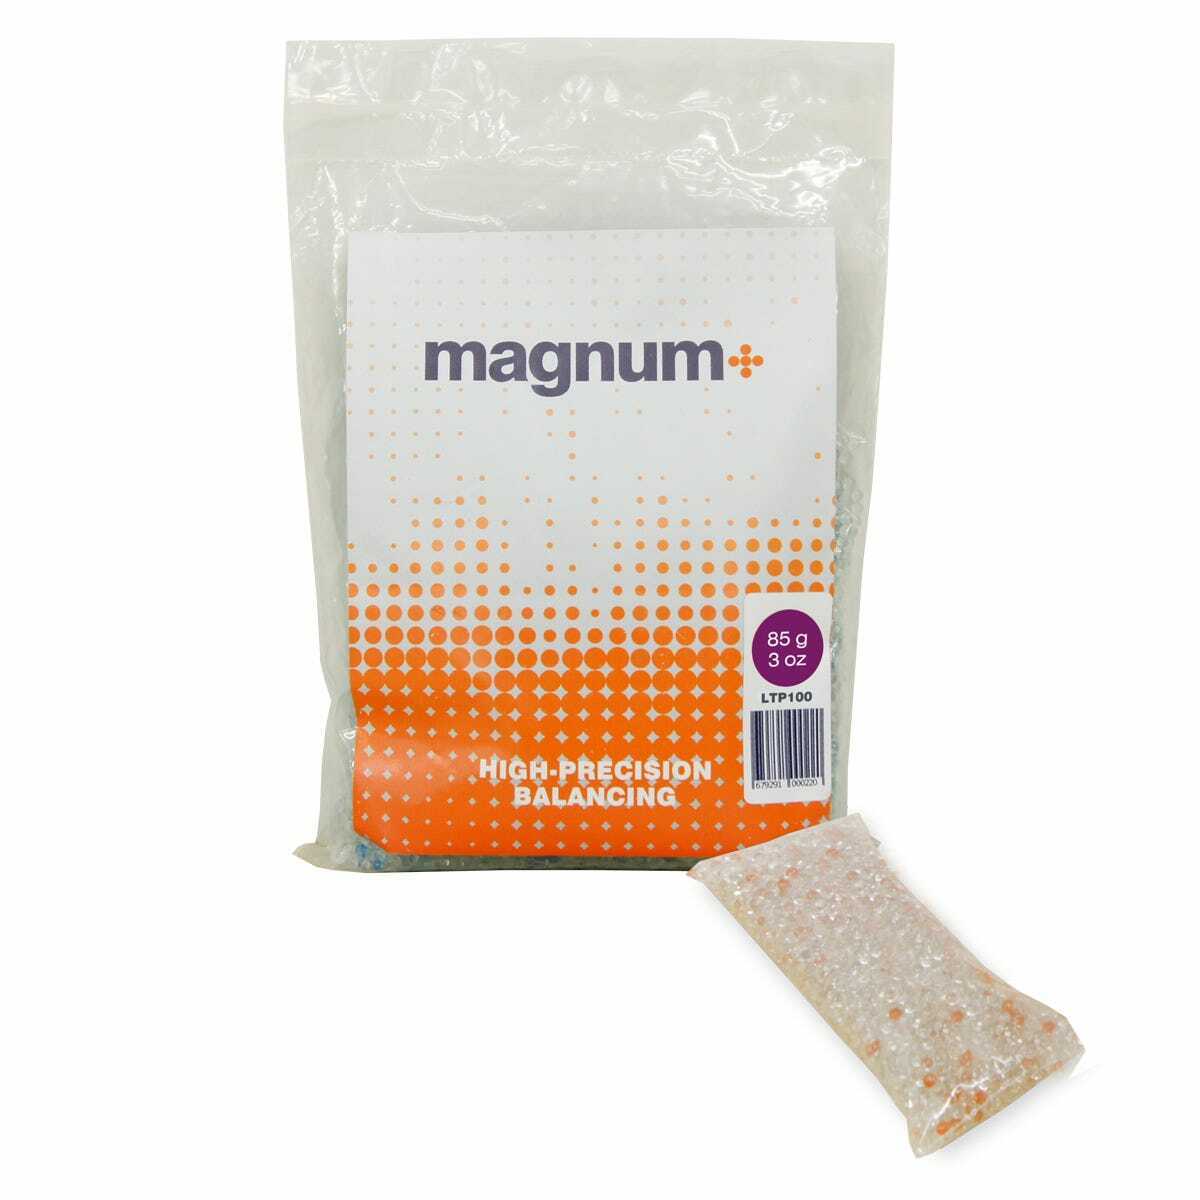 Magnum+ Tire Balancing Beads 3 OZ Set of 4 Bags - TPMS Compatible - Motorcycles